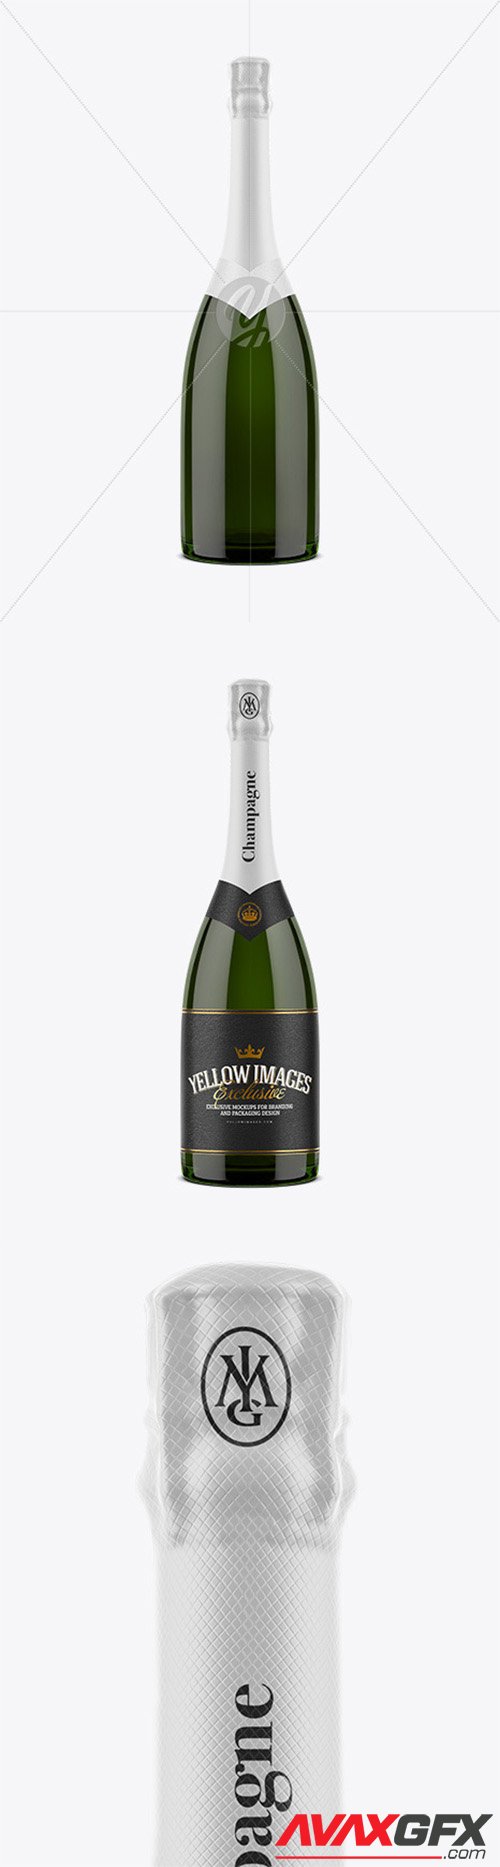 Download Champagne Bottle Mockup 52756 Avaxgfx All Downloads That You Need In One Place Graphic From Nitroflare Rapidgator Yellowimages Mockups